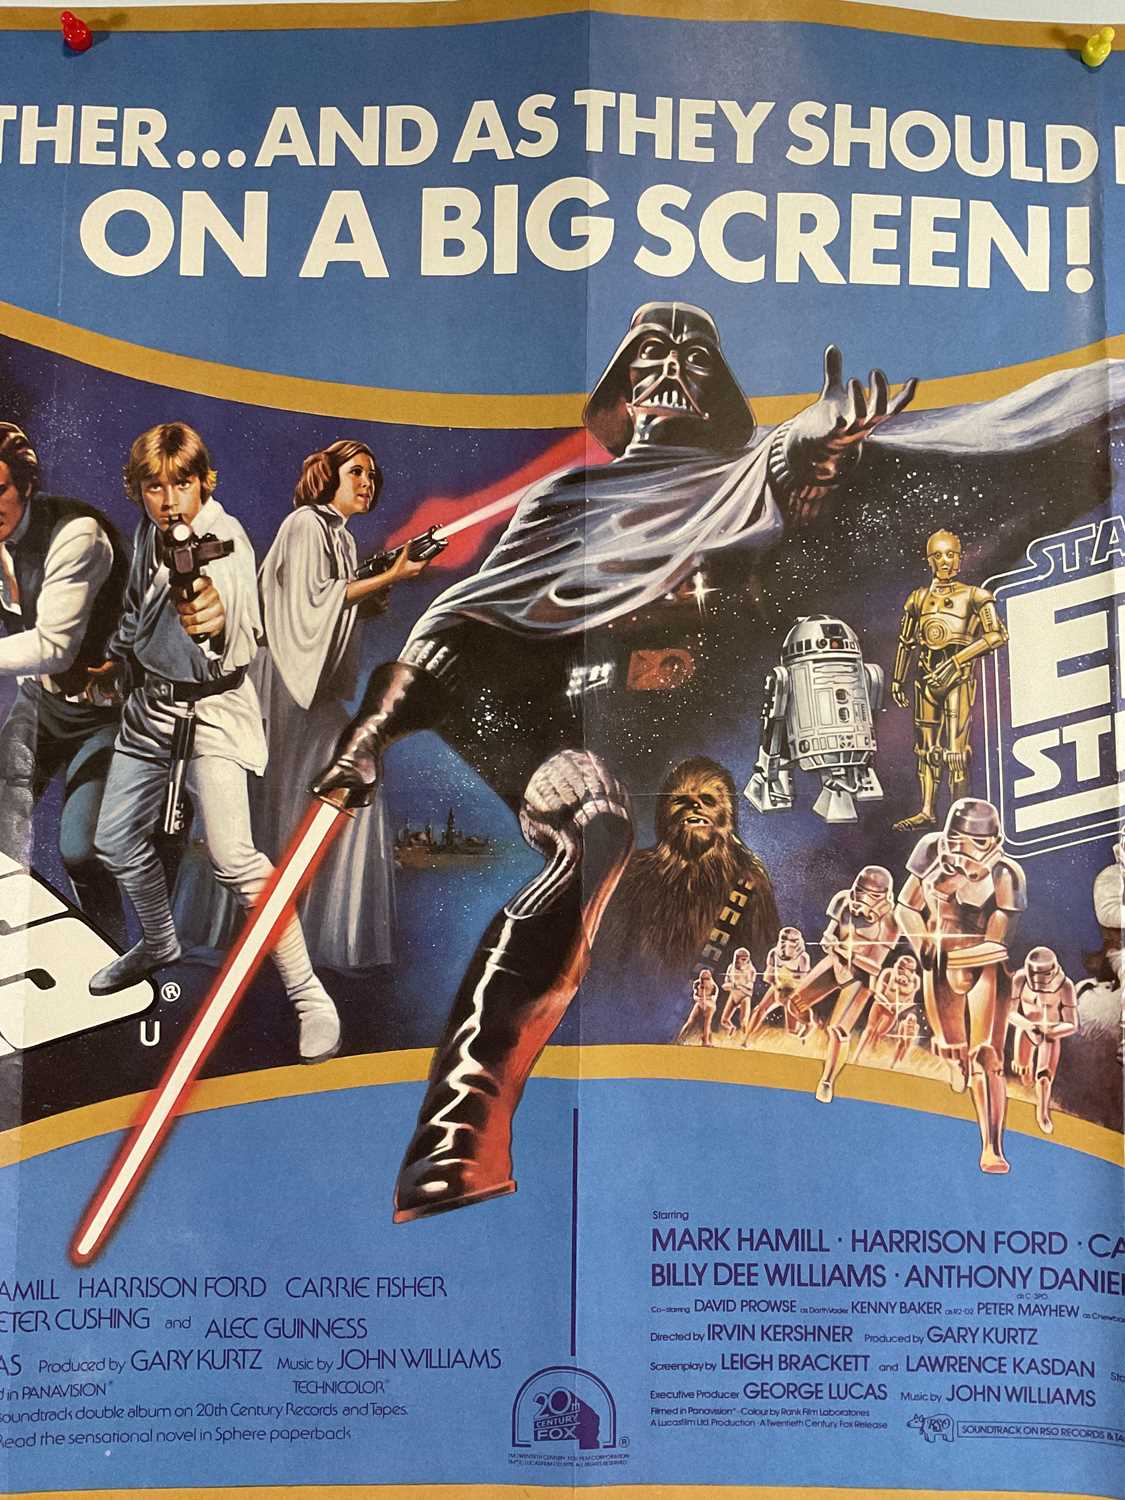 STAR WARS / THE EMPIRE STRIKES BACK (1980) Double-bill UK Quad film poster, featuring combined - Image 5 of 7